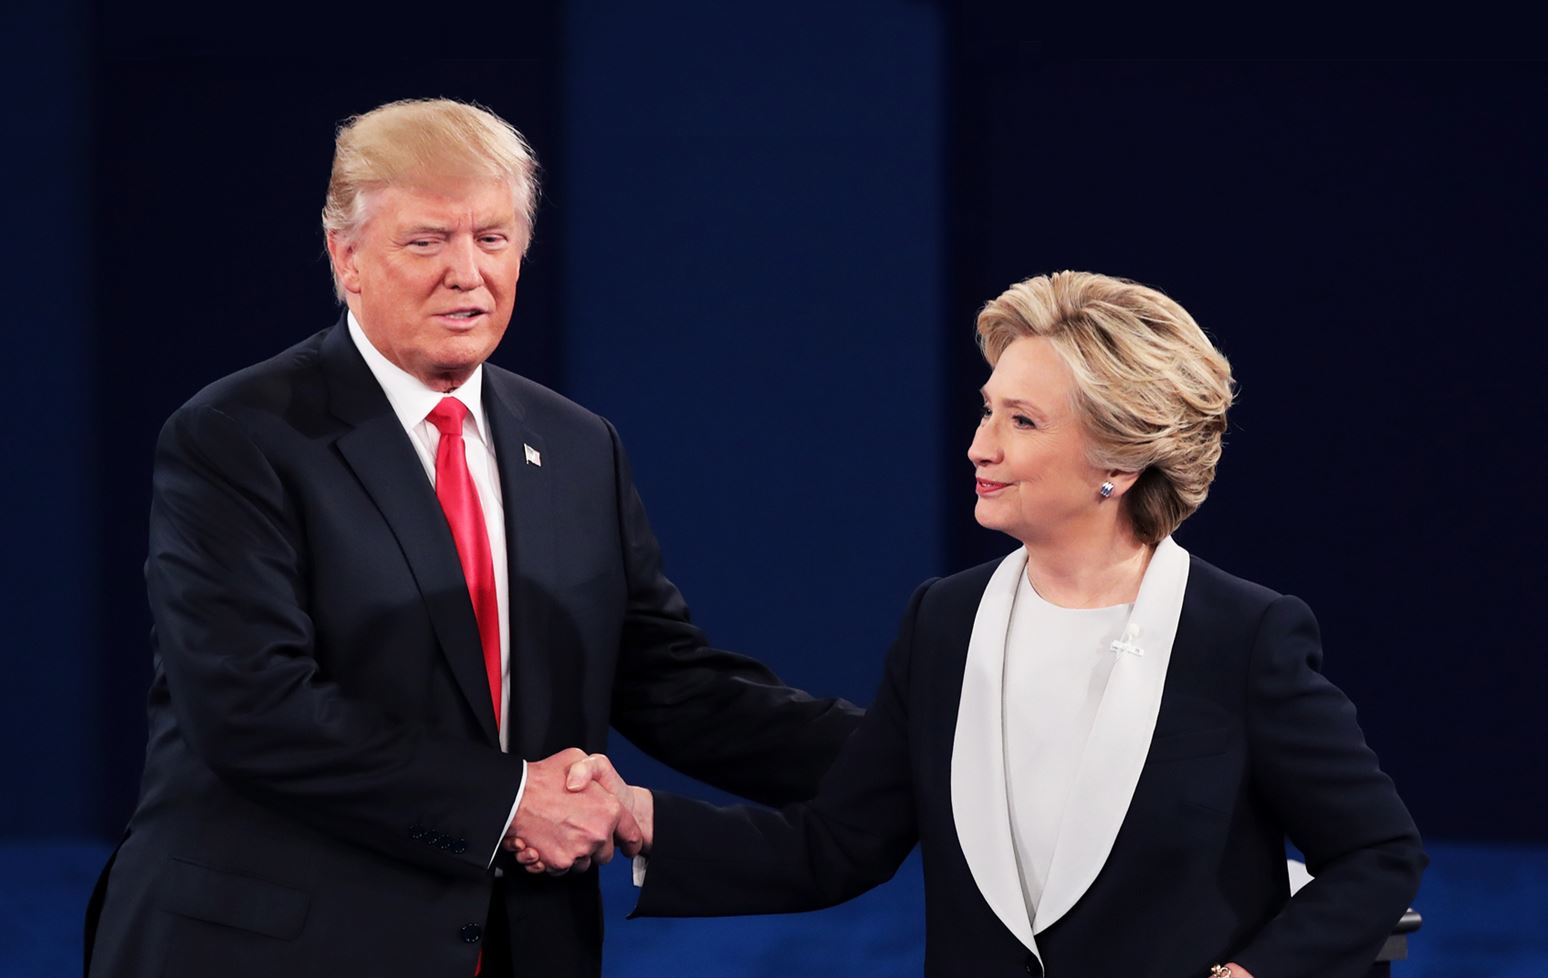 Trump and Clinton shaking hands